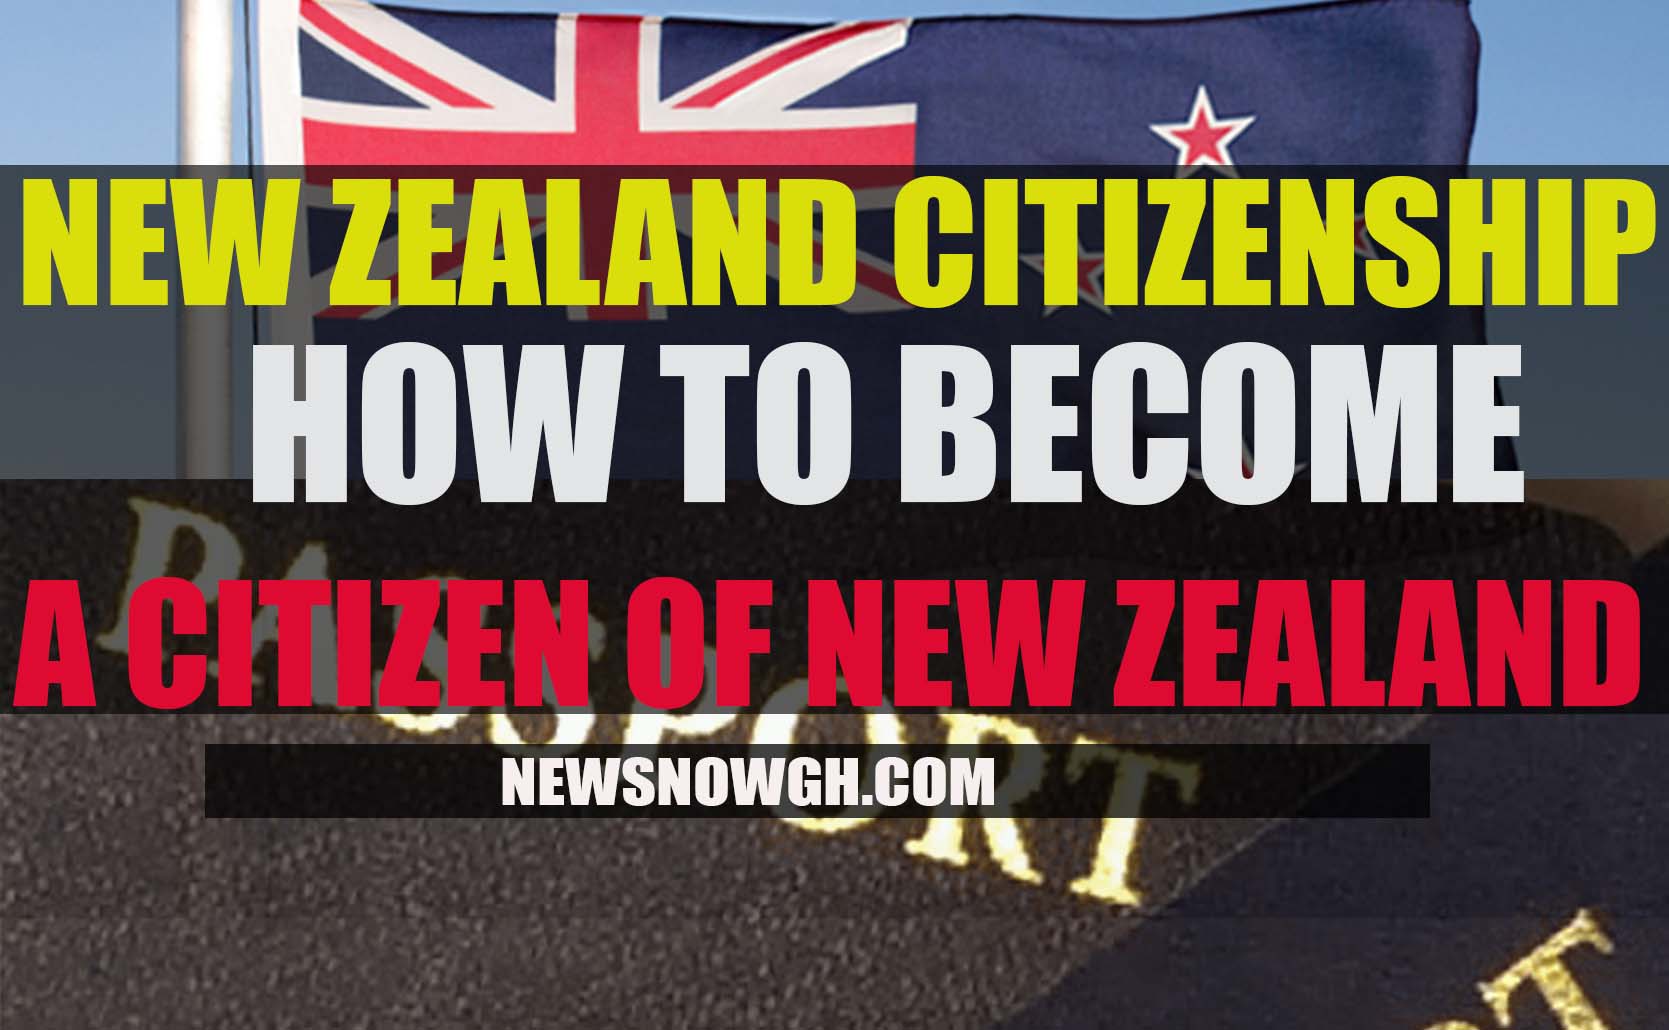 BECOME A CITIZEN OF NEW ZEALAND